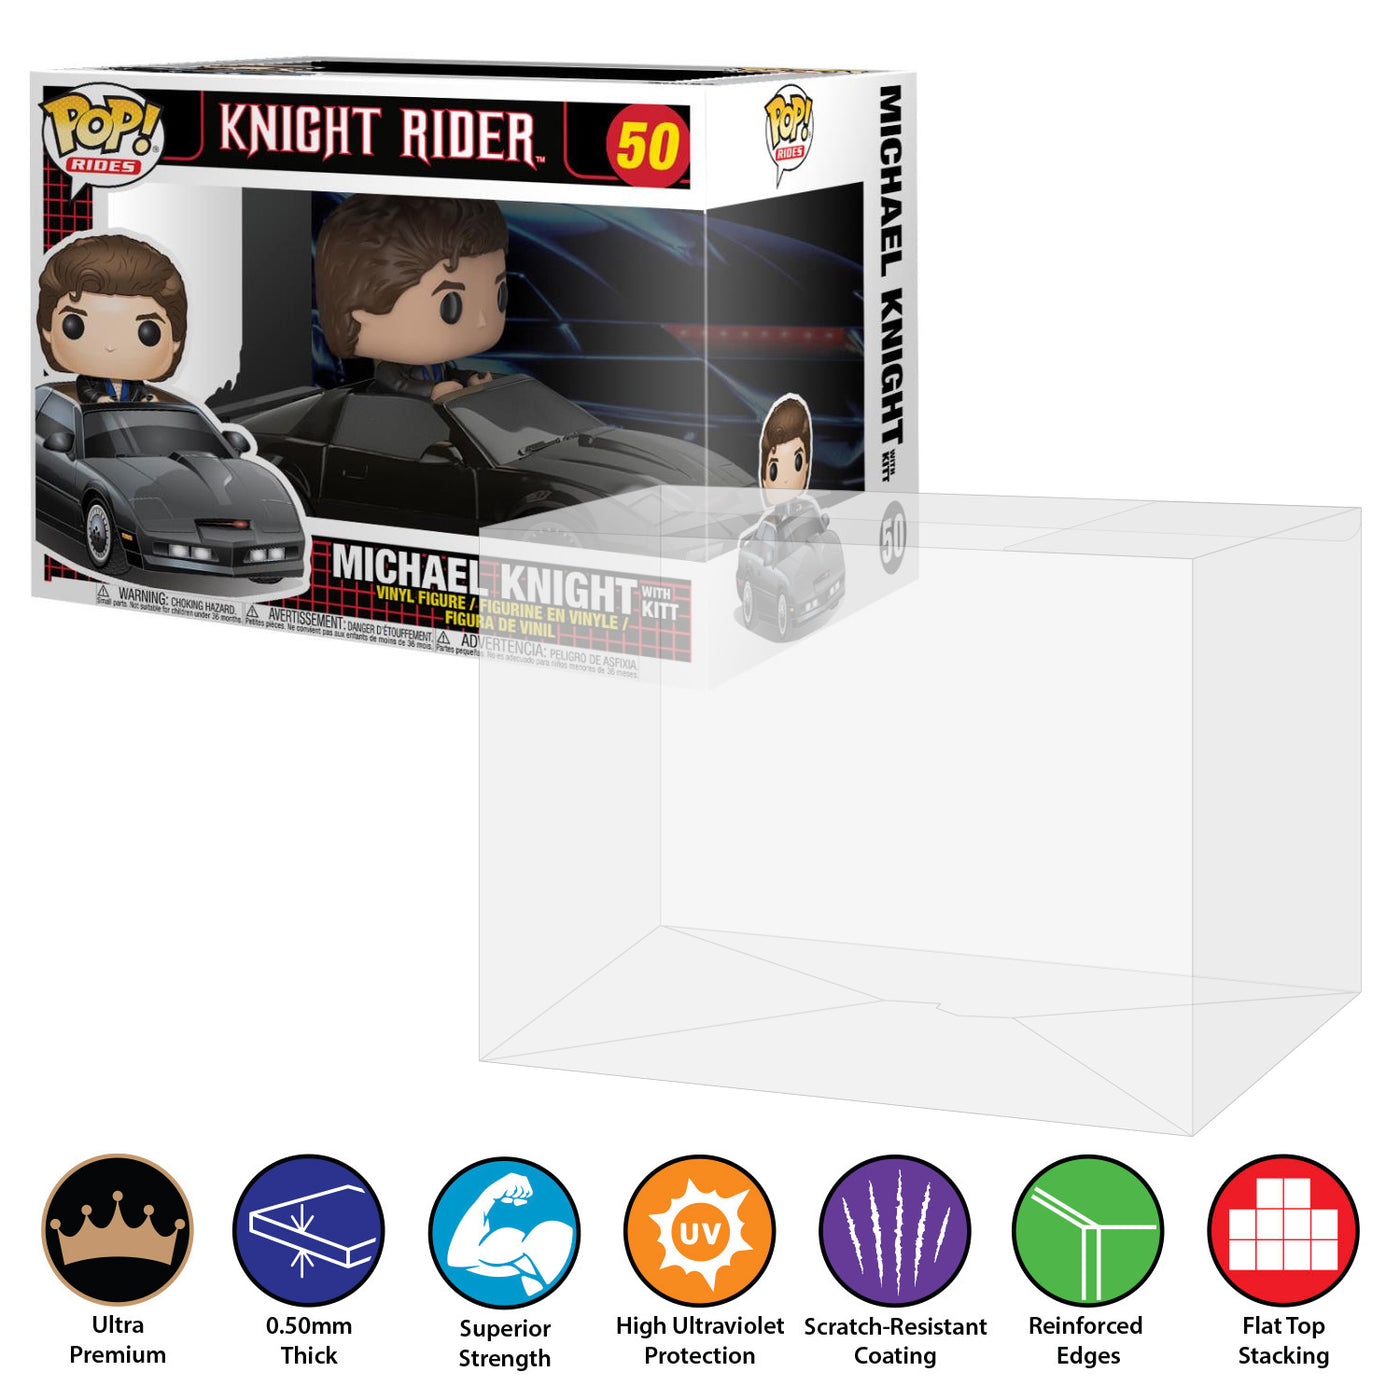 50 knight rider michael knight with kitt pop rides best funko pop protectors thick strong uv scratch flat top stack vinyl display geek plastic shield vaulted eco armor fits collect protect display case kollector protector